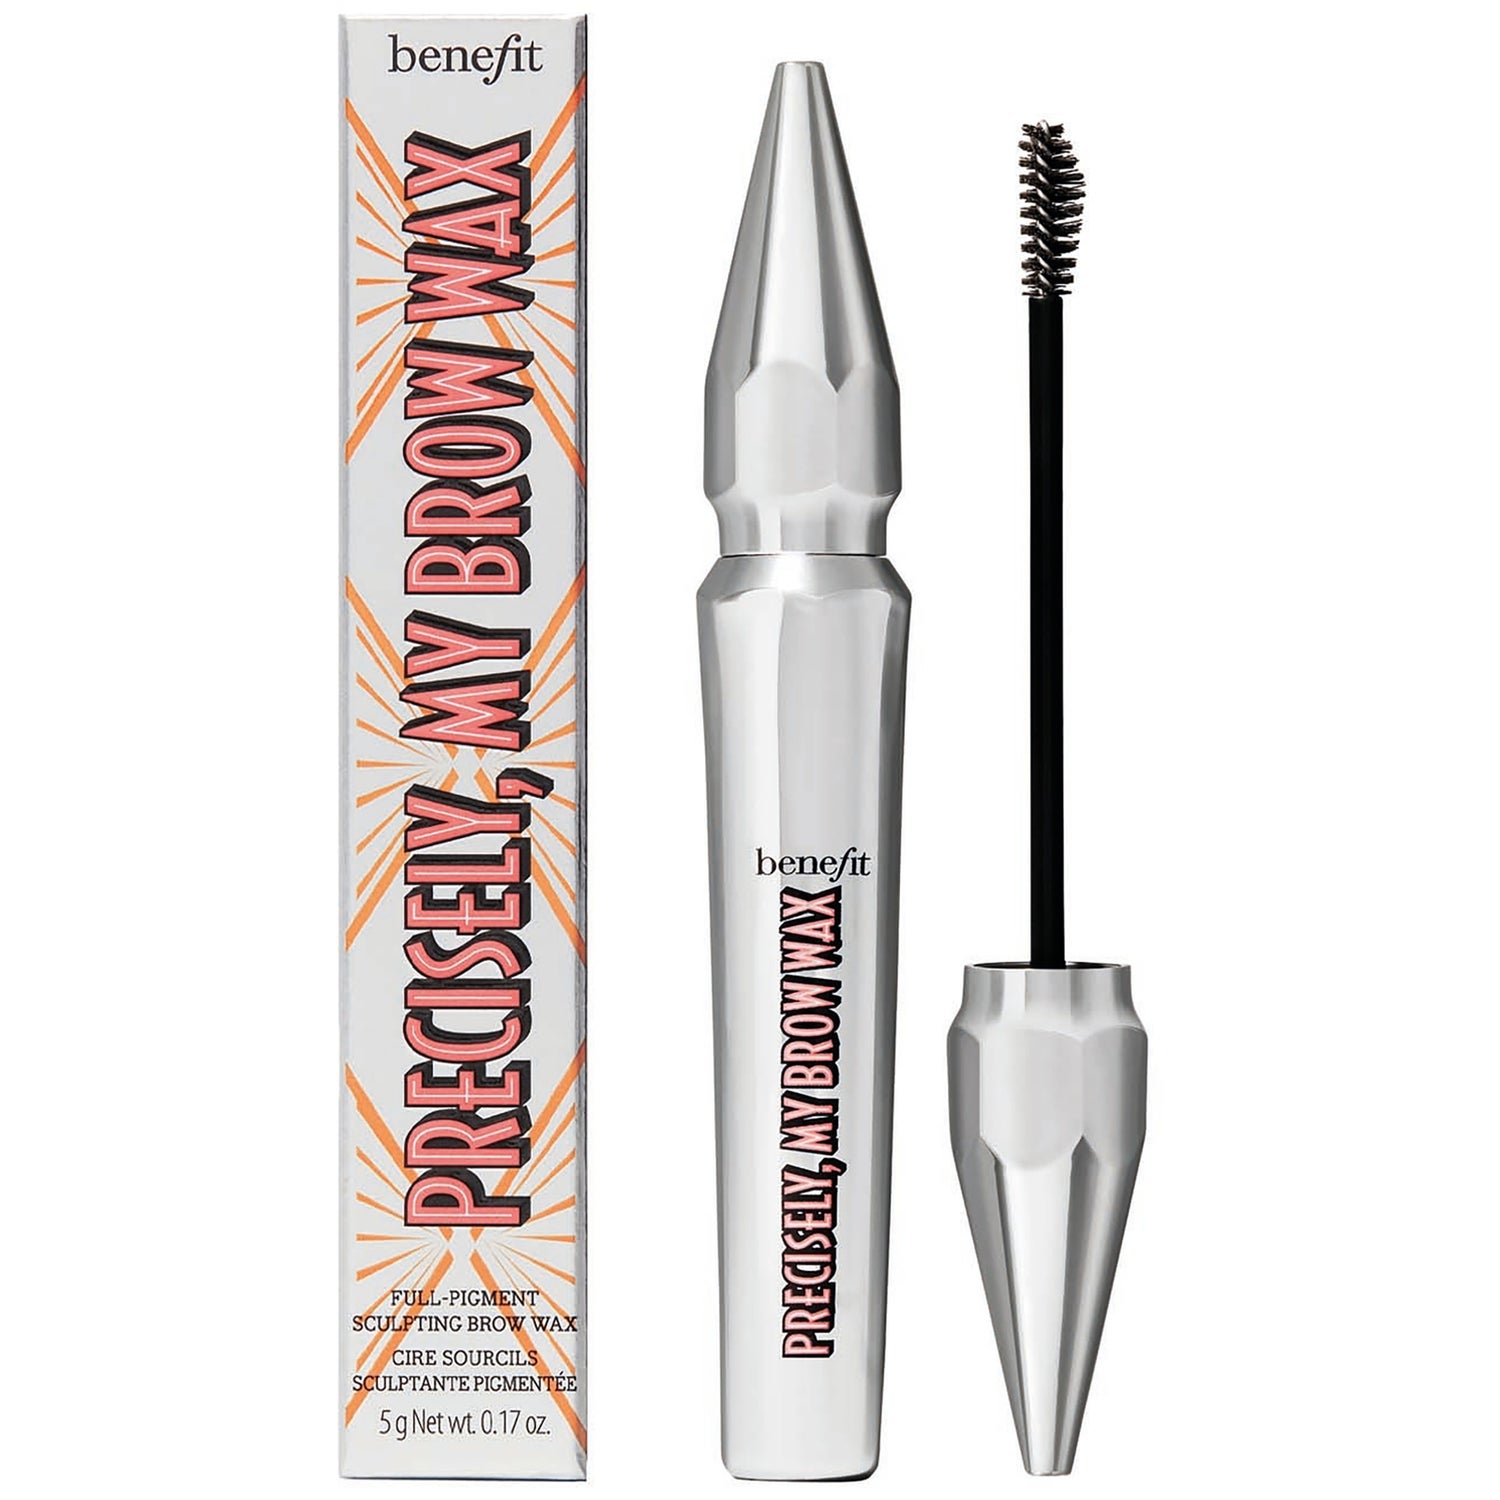 benefit Precisely My Brow Full Pigment Sculpting Brow Wax 5g (Various Shades)